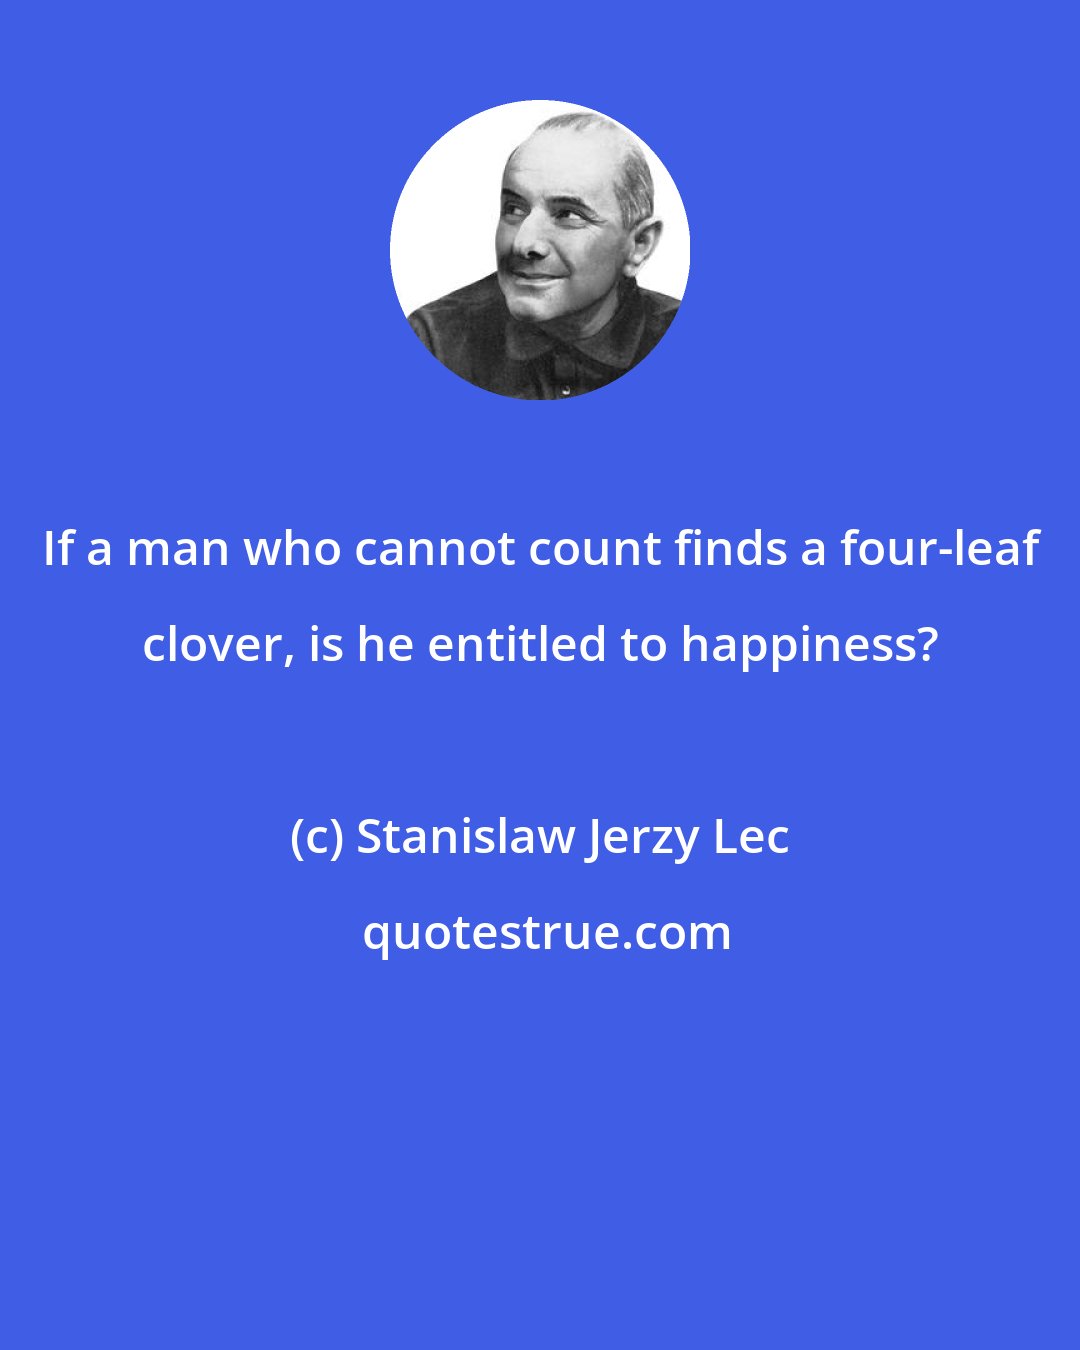 Stanislaw Jerzy Lec: If a man who cannot count finds a four-leaf clover, is he entitled to happiness?